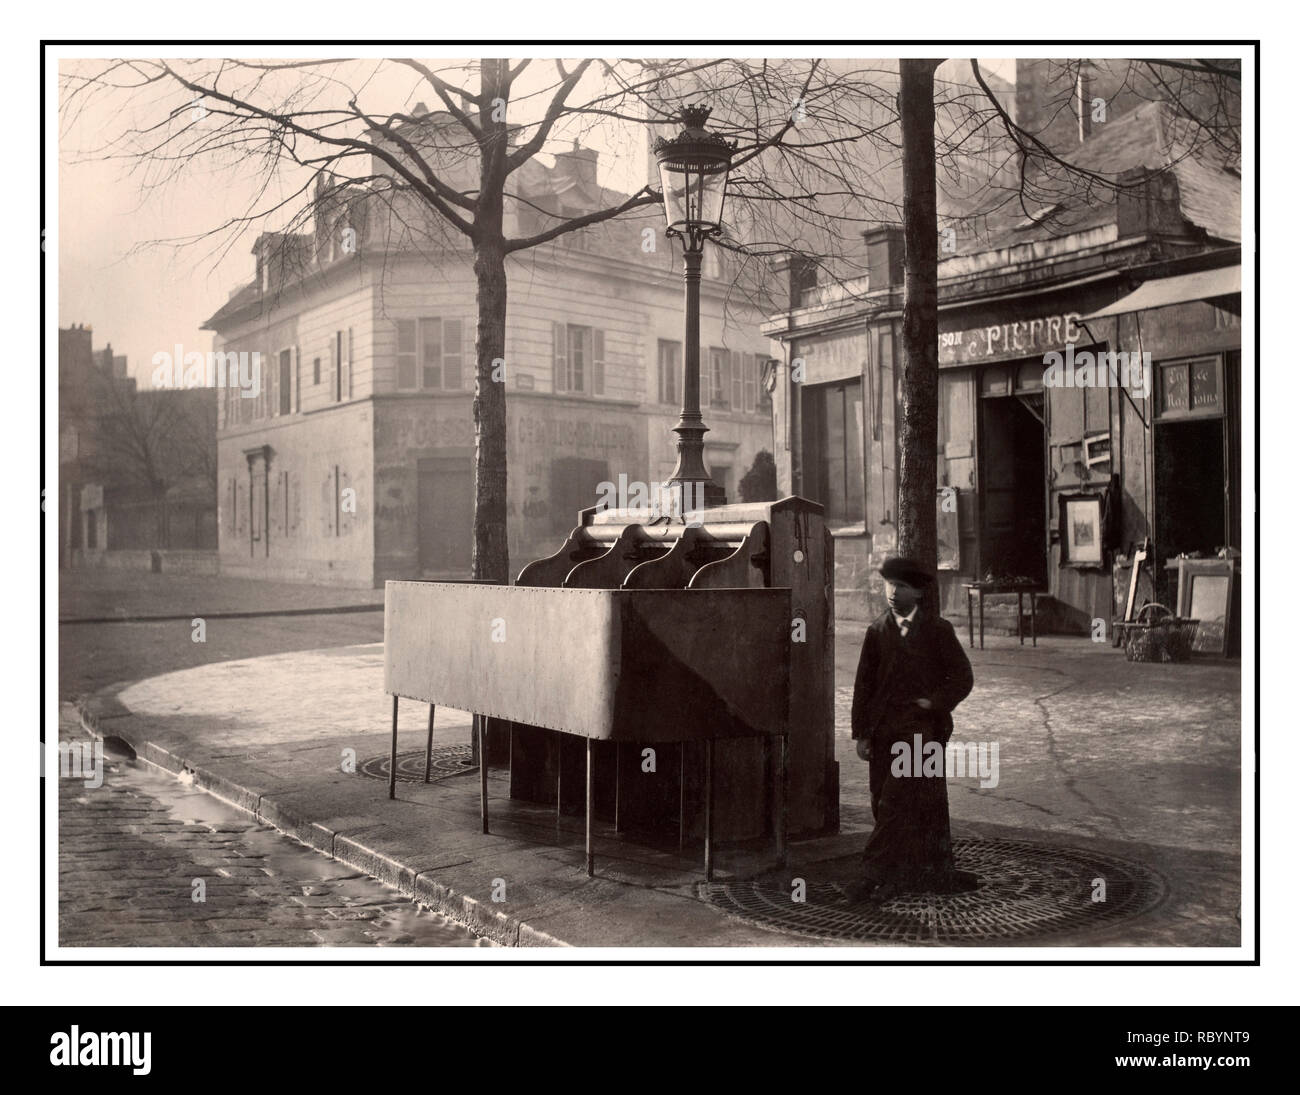 Vintage B&W French 'Pissoir' 'Uritrottoir' typical historical Paris Street Men’s Urinal Cast iron and slate urinal with three stalls raised modesty screen, mounted with lamppost and lantern.With young man standing nearby. Avenue du Maine, Paris, France. Date circa 1865  Charles Marville photographer  (1813–1879) Stock Photo